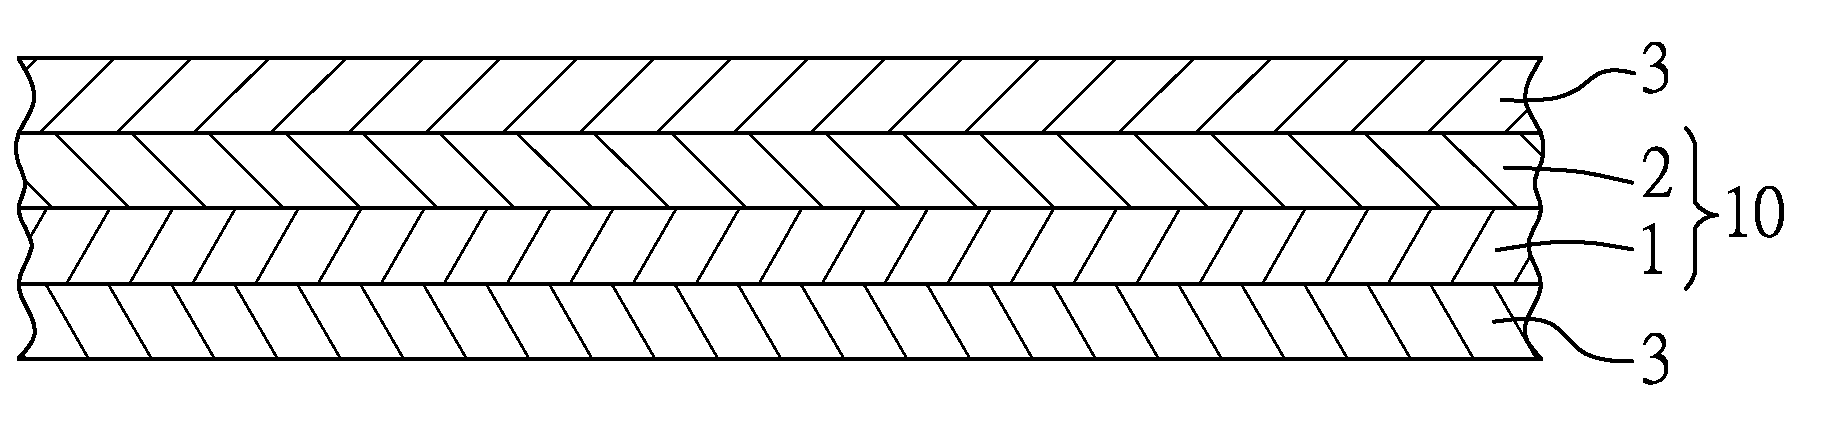 Nonwoven fabric composite and method for making the same